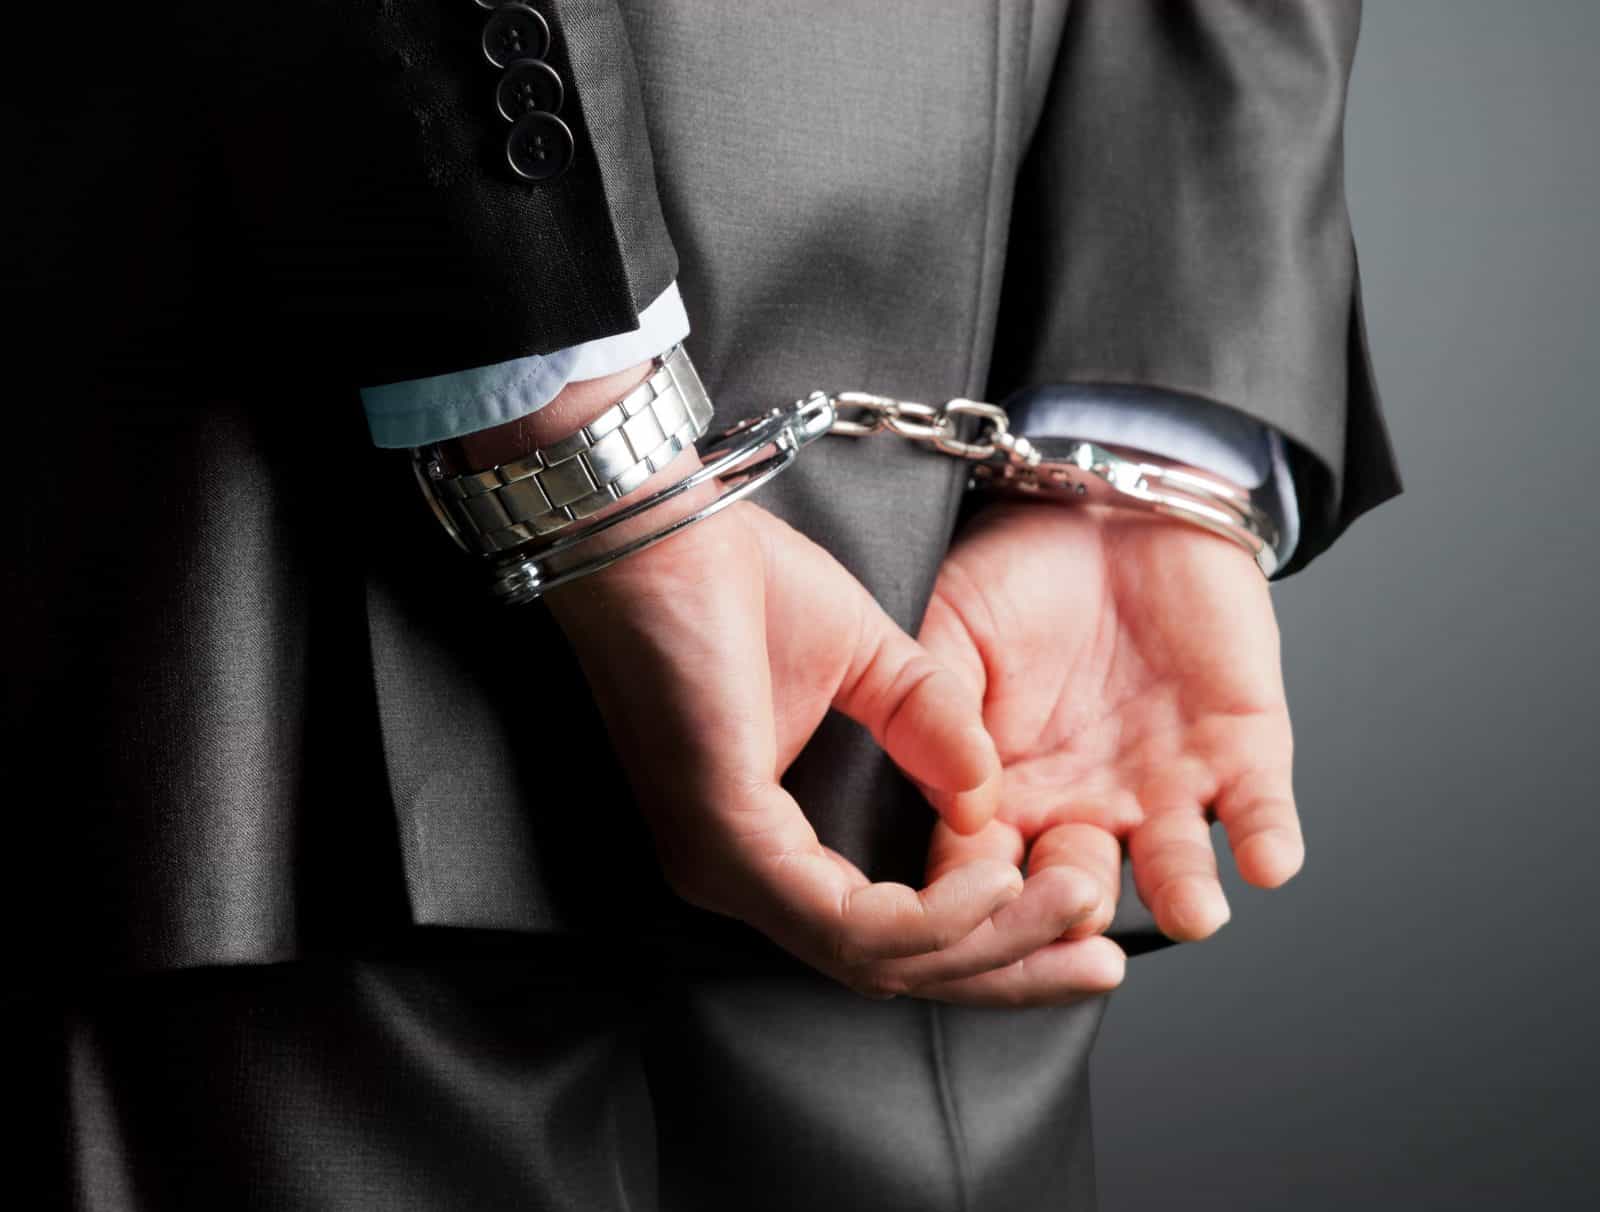 suited man's hands in handcuffs